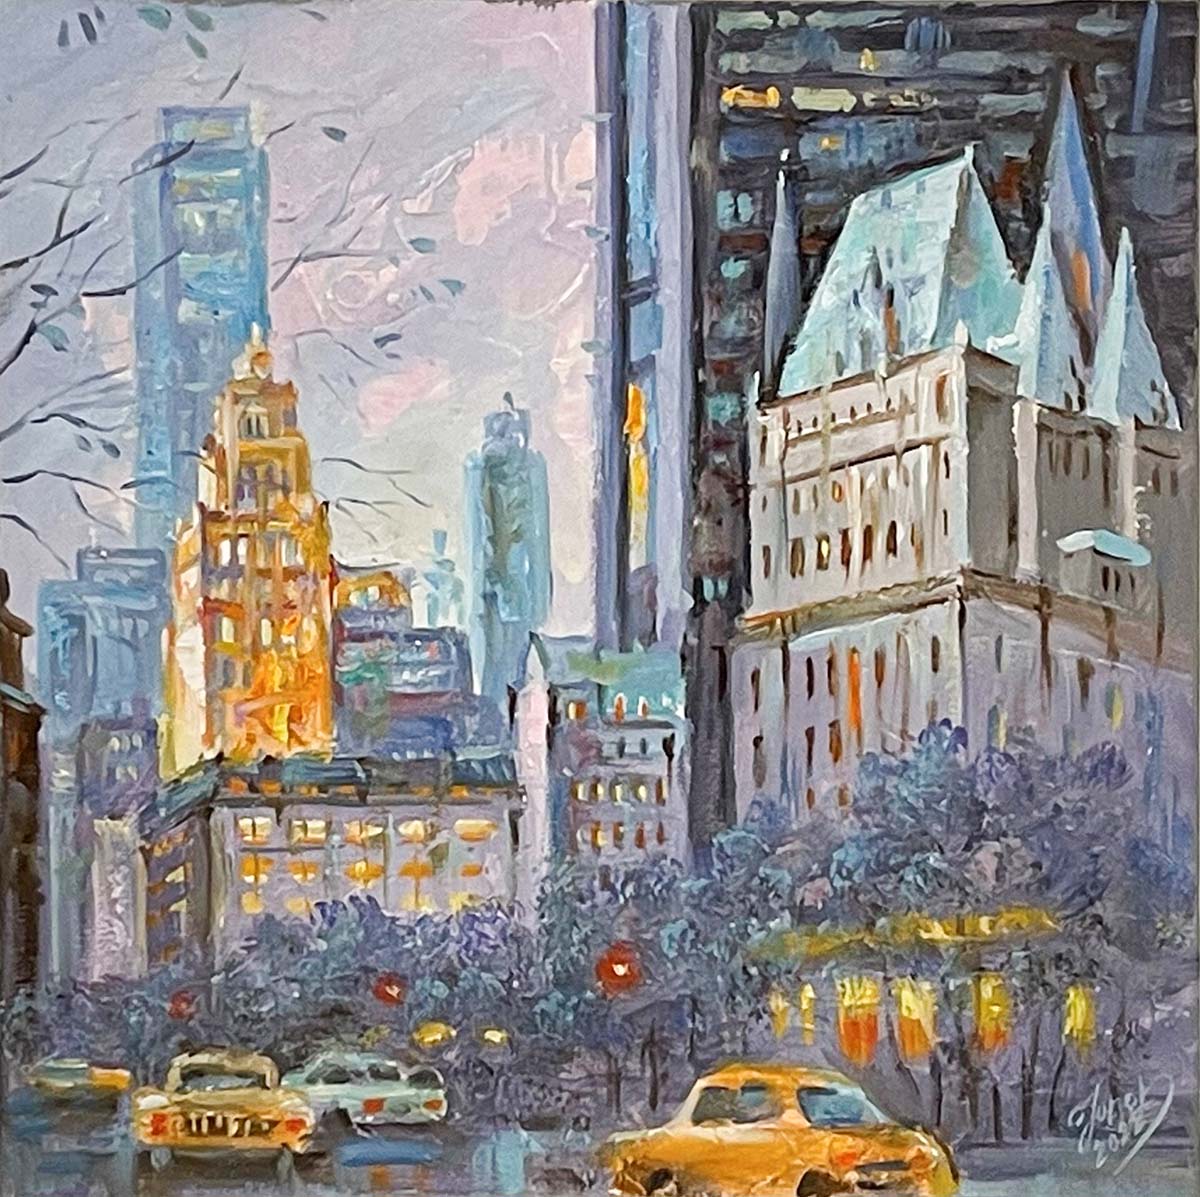 Contemporary Art. Title: Hotel Vancouver, Oil on canvas, 10x10 in by artist Mykola Yurov.